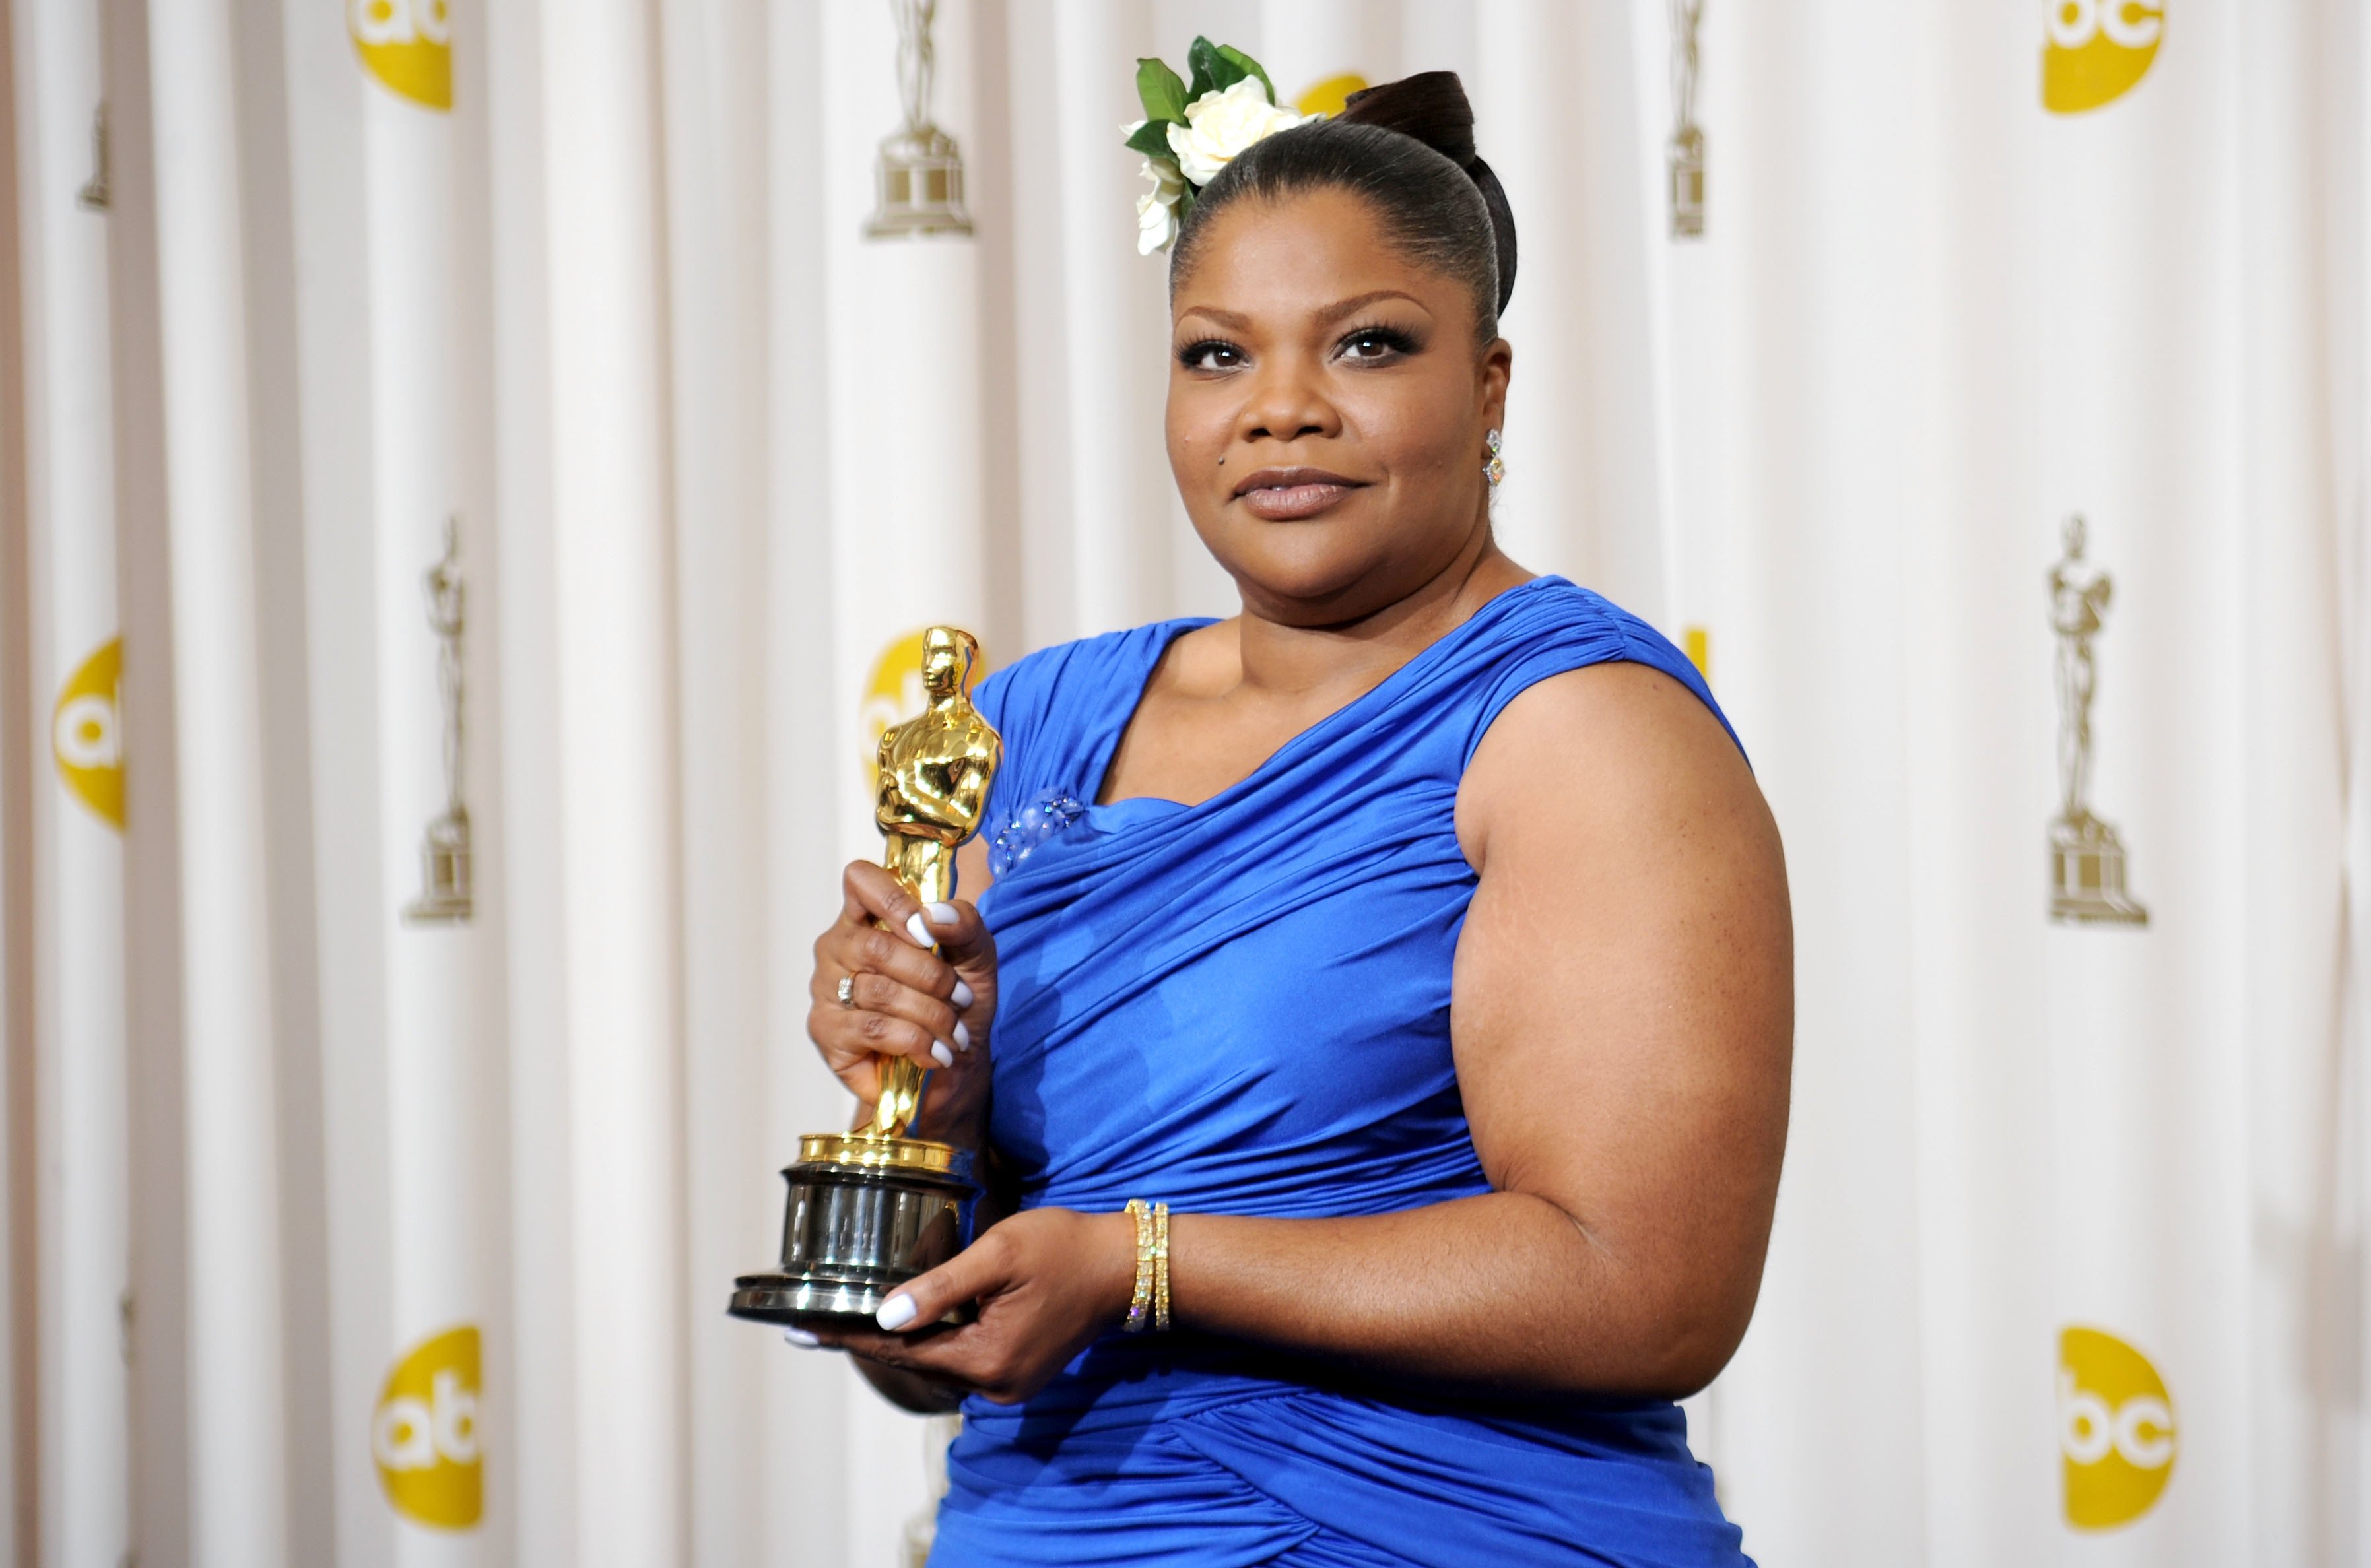 Mo'Nique at the 2010 Academy Awards, where she won the Oscar for Best Supporting Actress for "Precious", March 7, 2010 | Photo: Getty Images